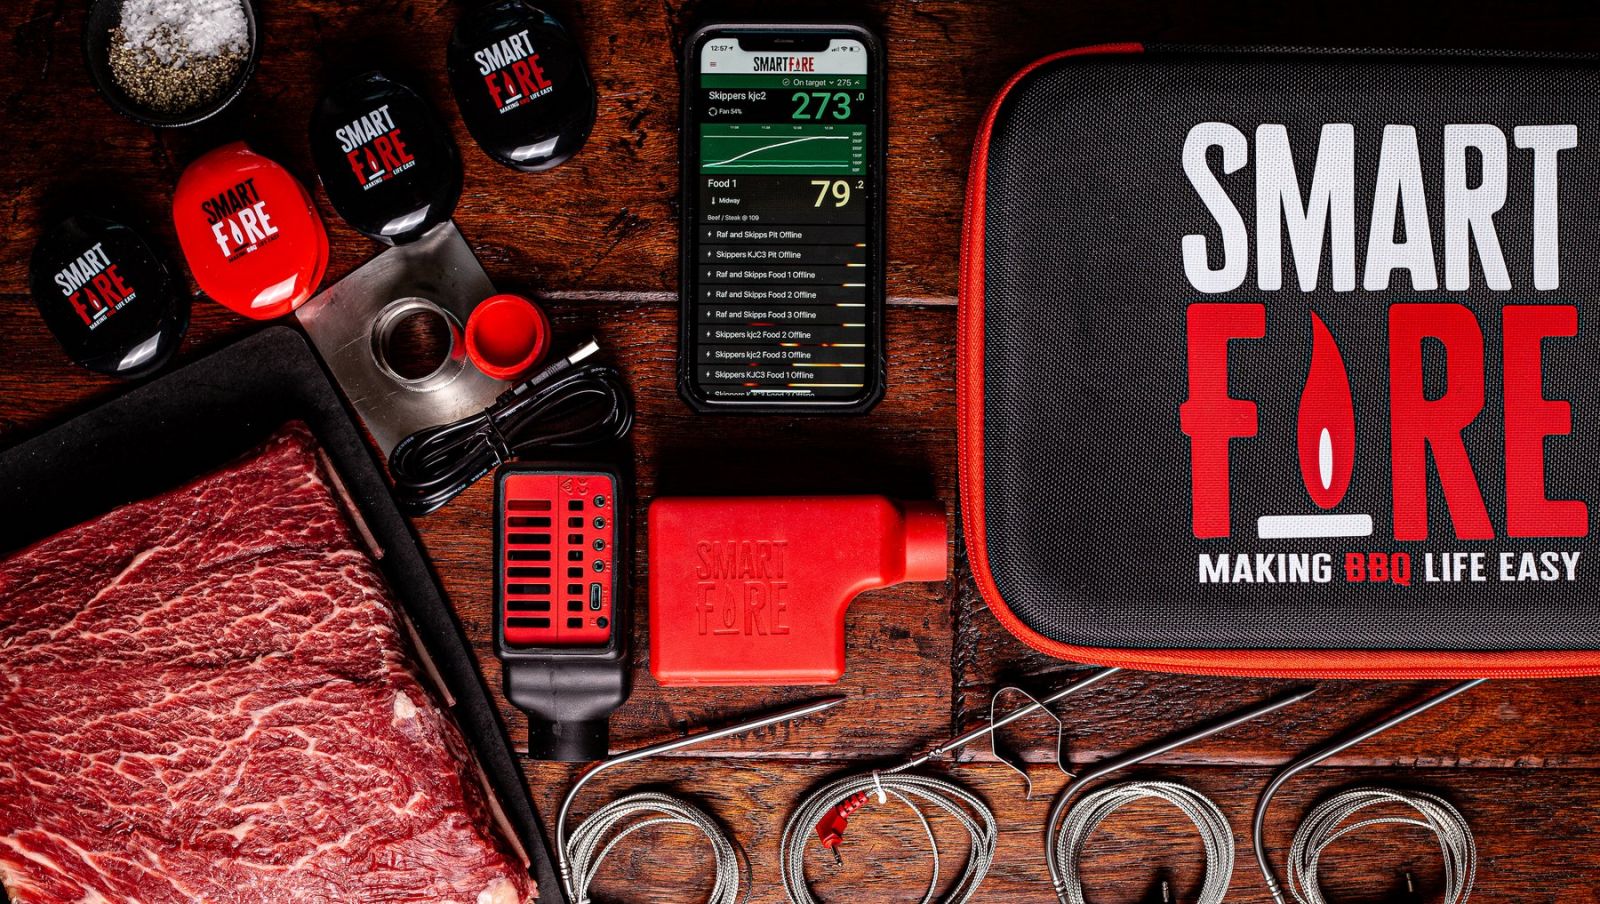 This image shows the smartfire kamado summer pack and its contents